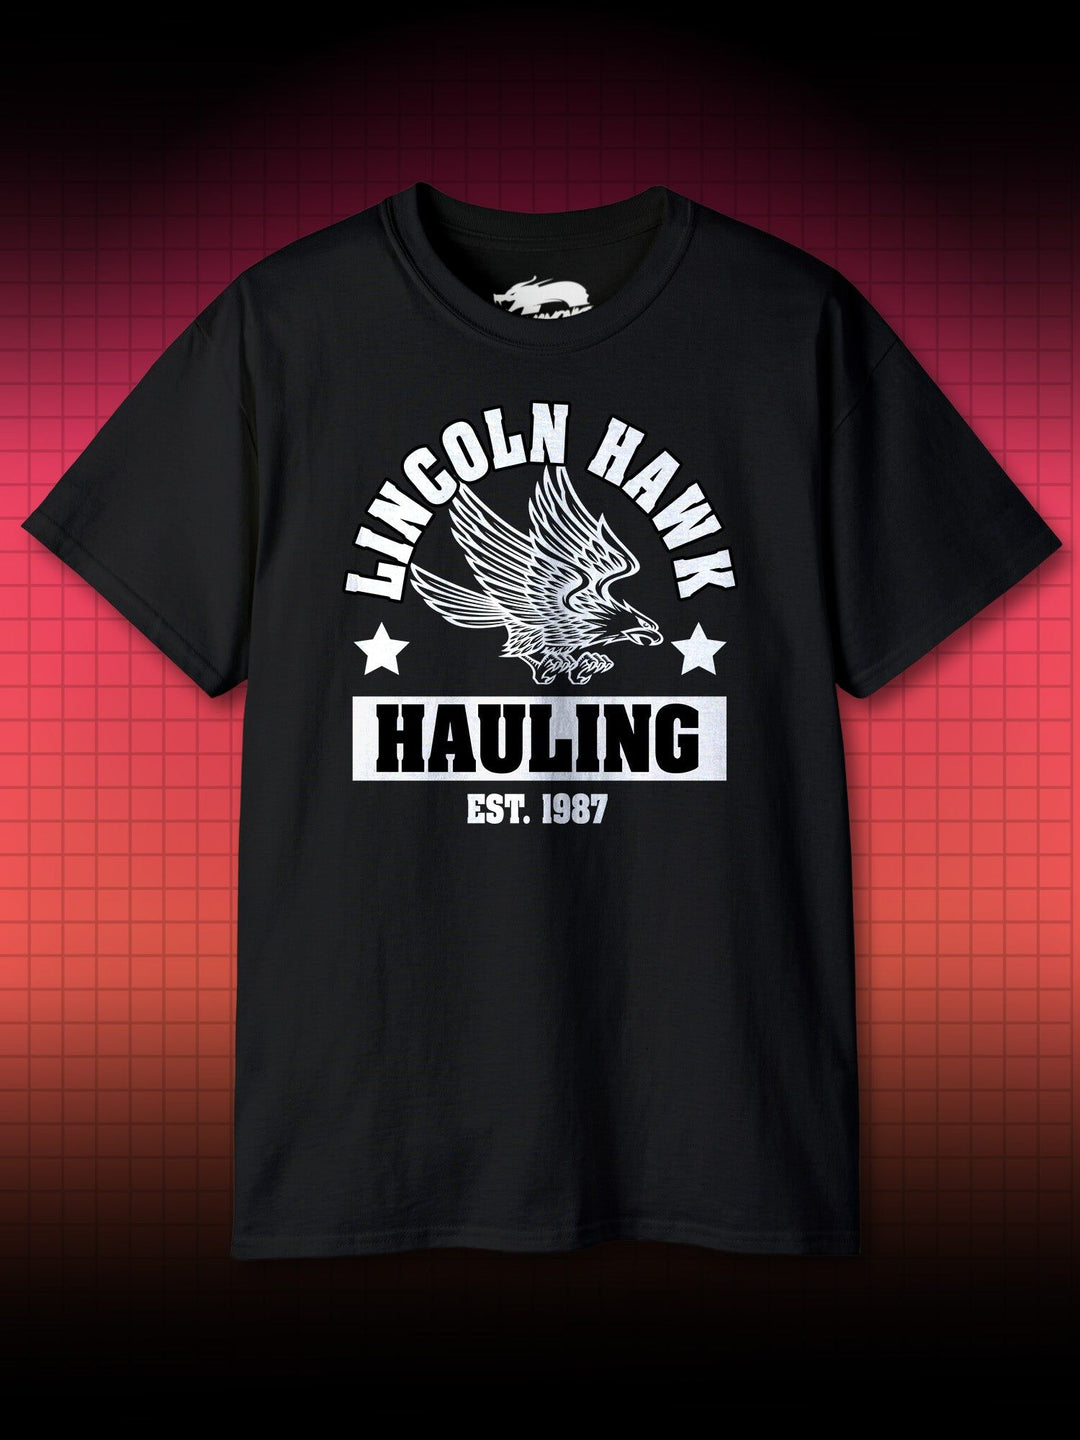 LINCOLN HAWK HAULING OVER THE TOP | SYLVESTER STALLONE BULL HURLEY | T-SHIRT - DRAMAMONKS